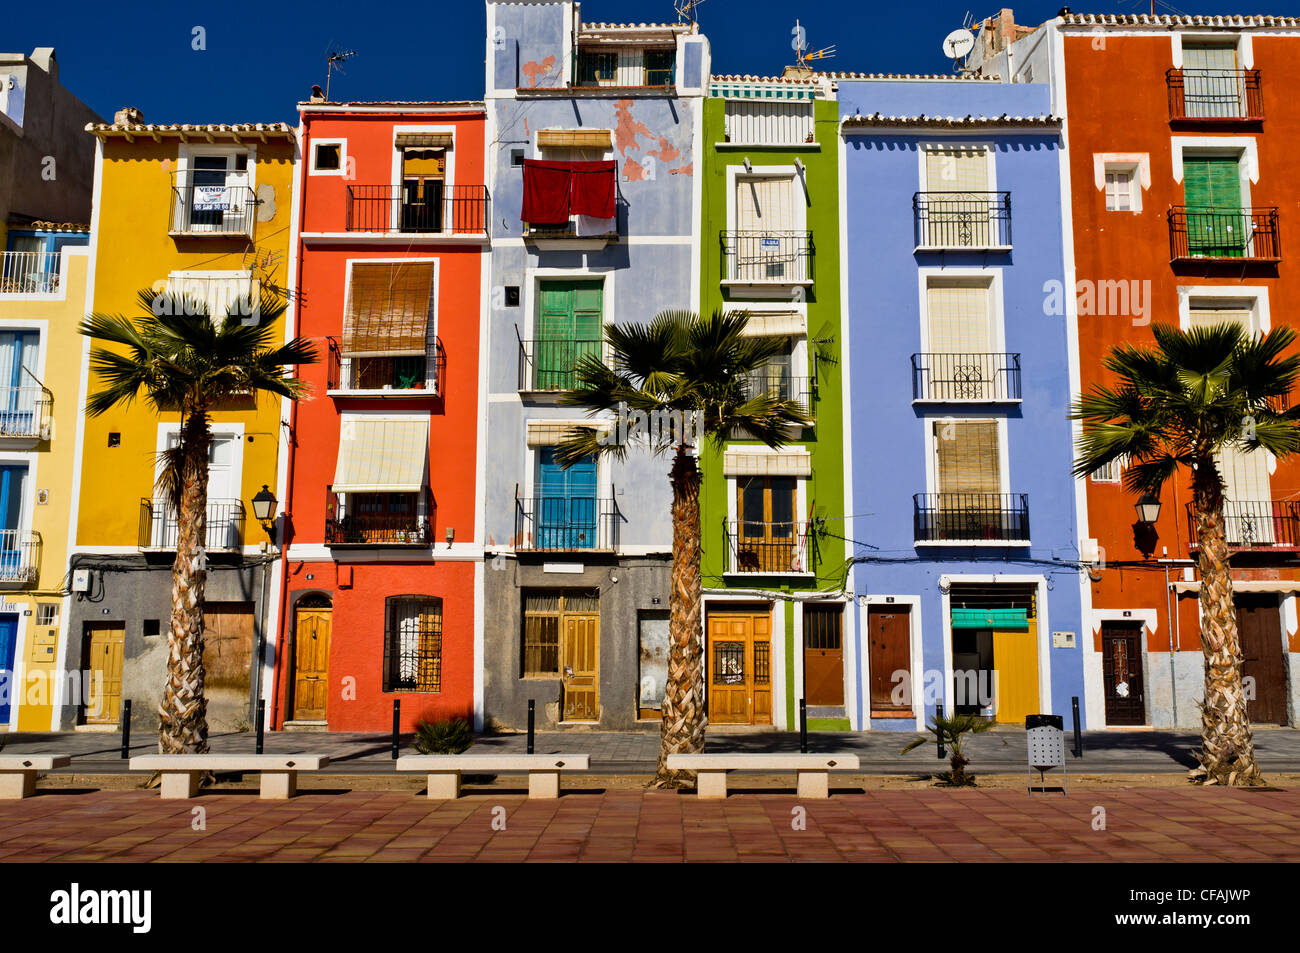 Multi-colored fishermens houses in a Spanish seaside town. Stock Photo